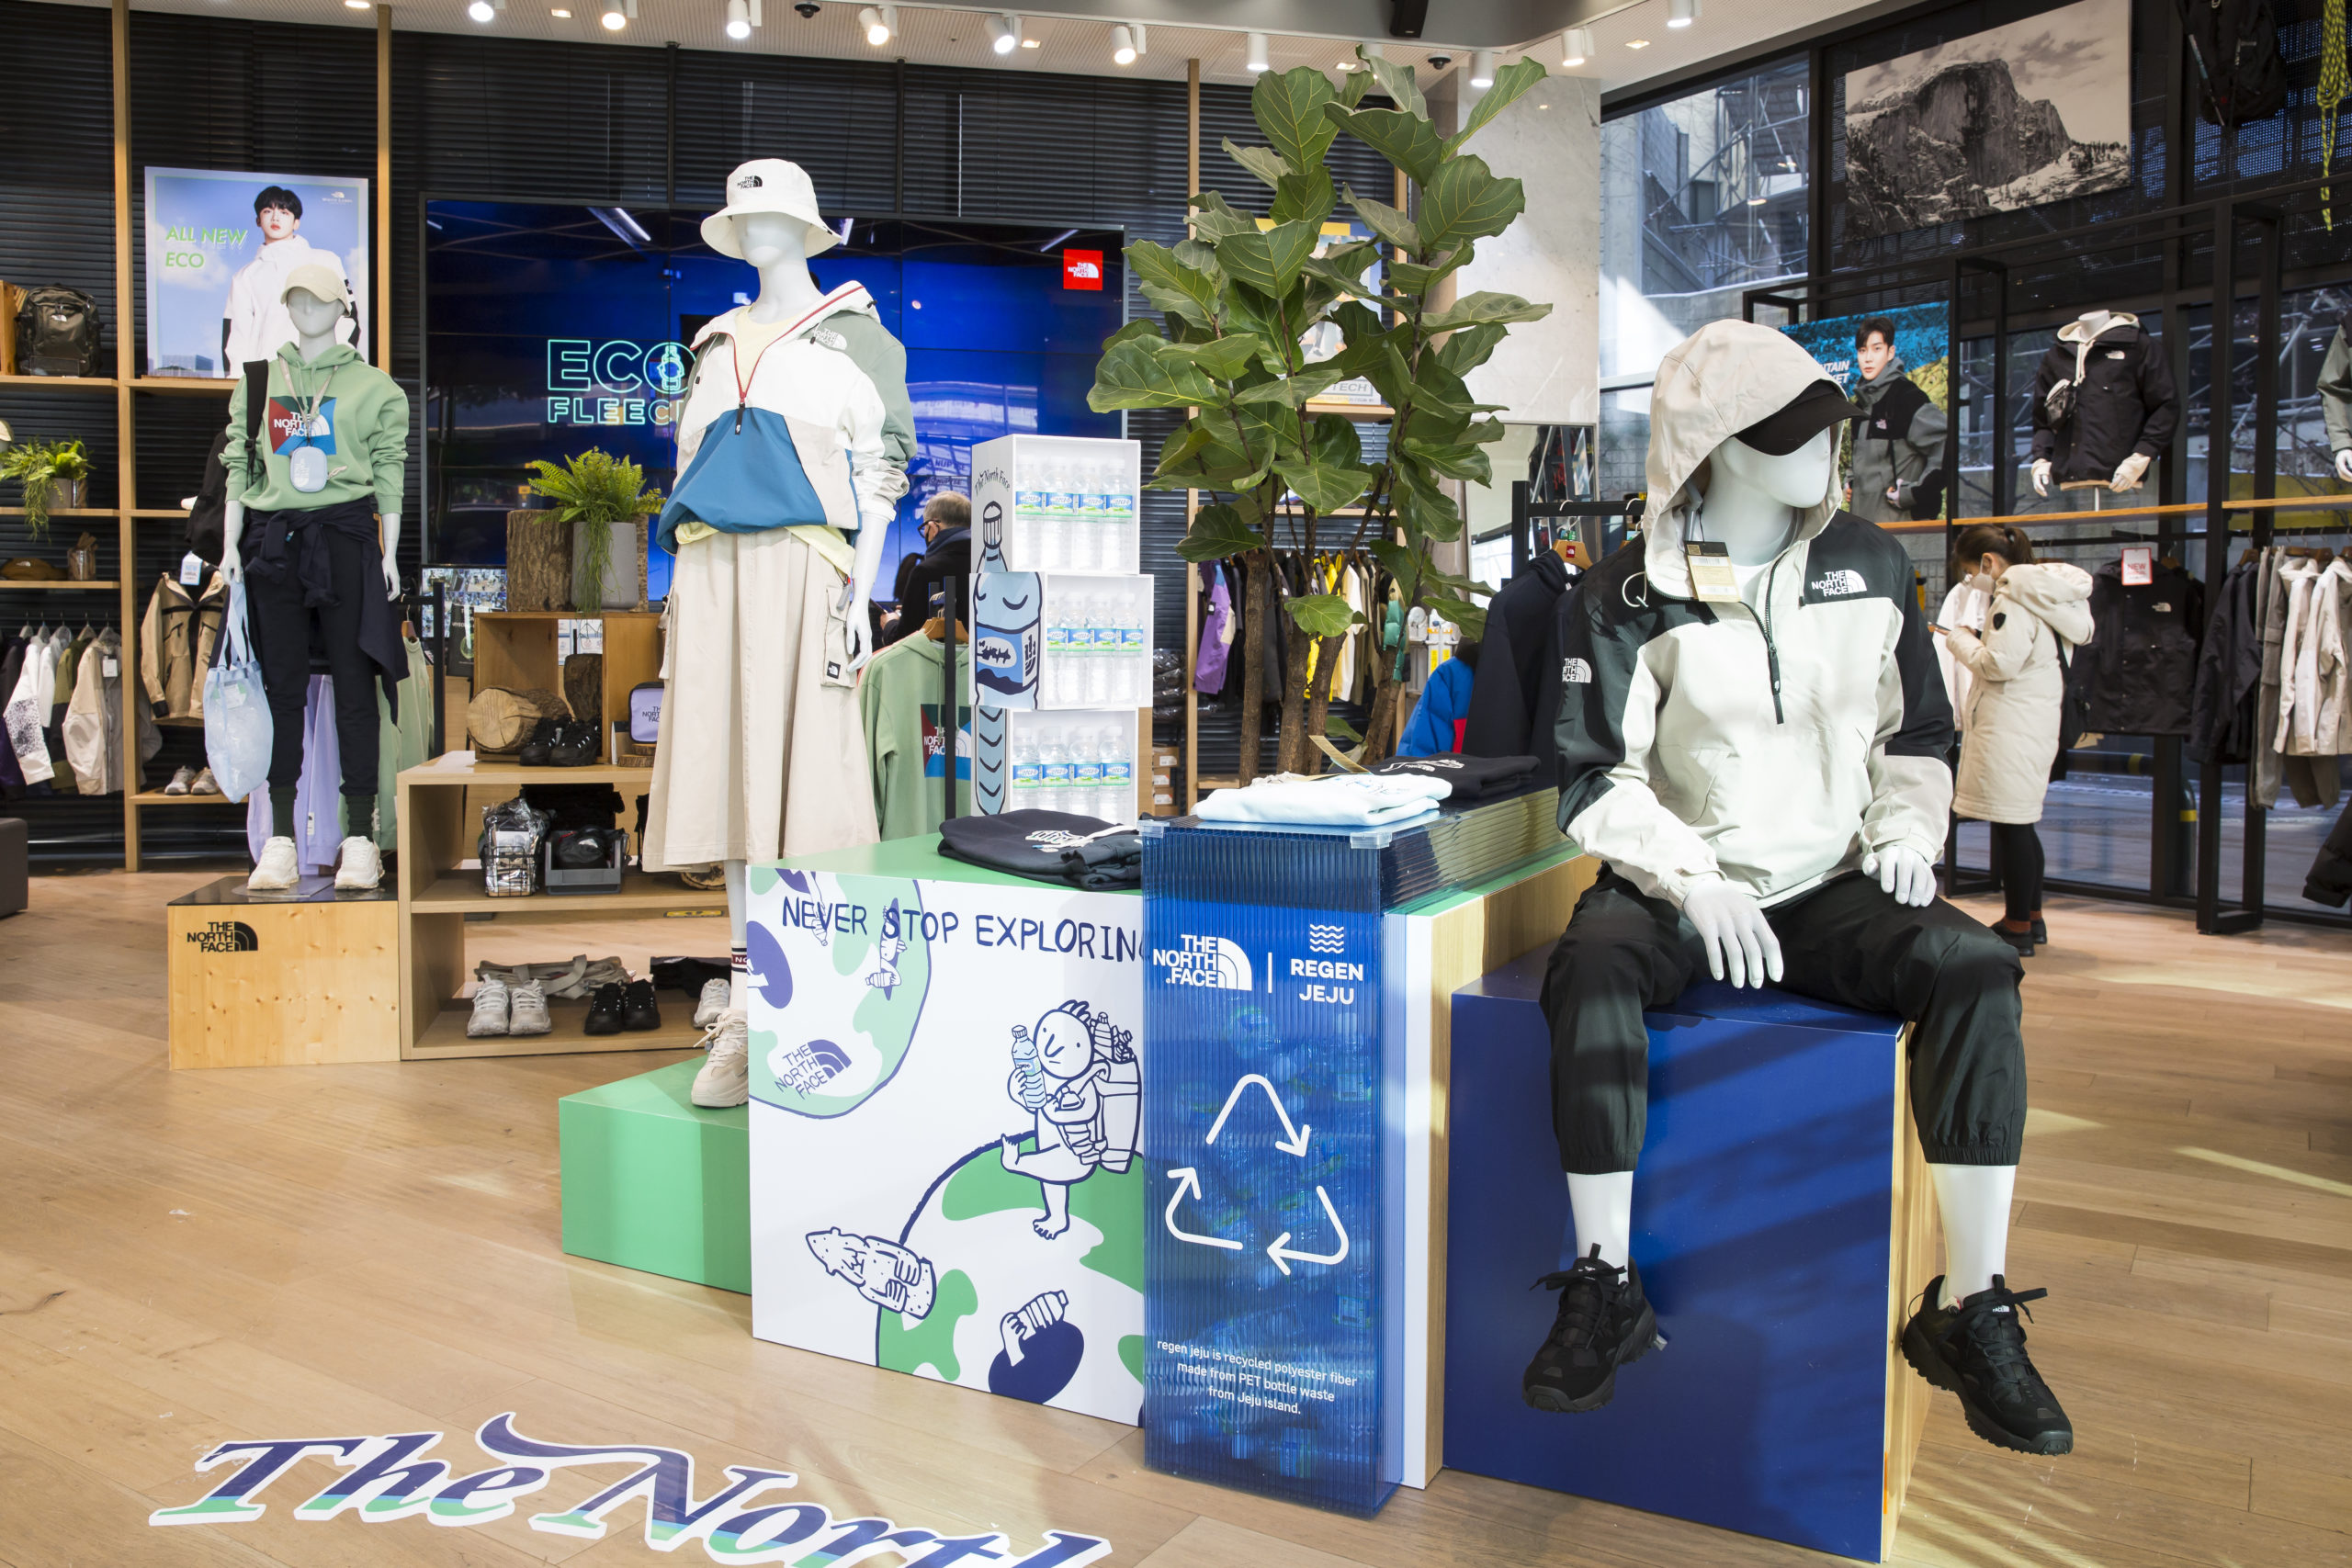 acuut toetje Sportschool The North Face Korea's Never Stop Exploring Campaign Draws Attention to its  New Eco-Friendly regen jeju Collection – Hyosung Performance Textiles